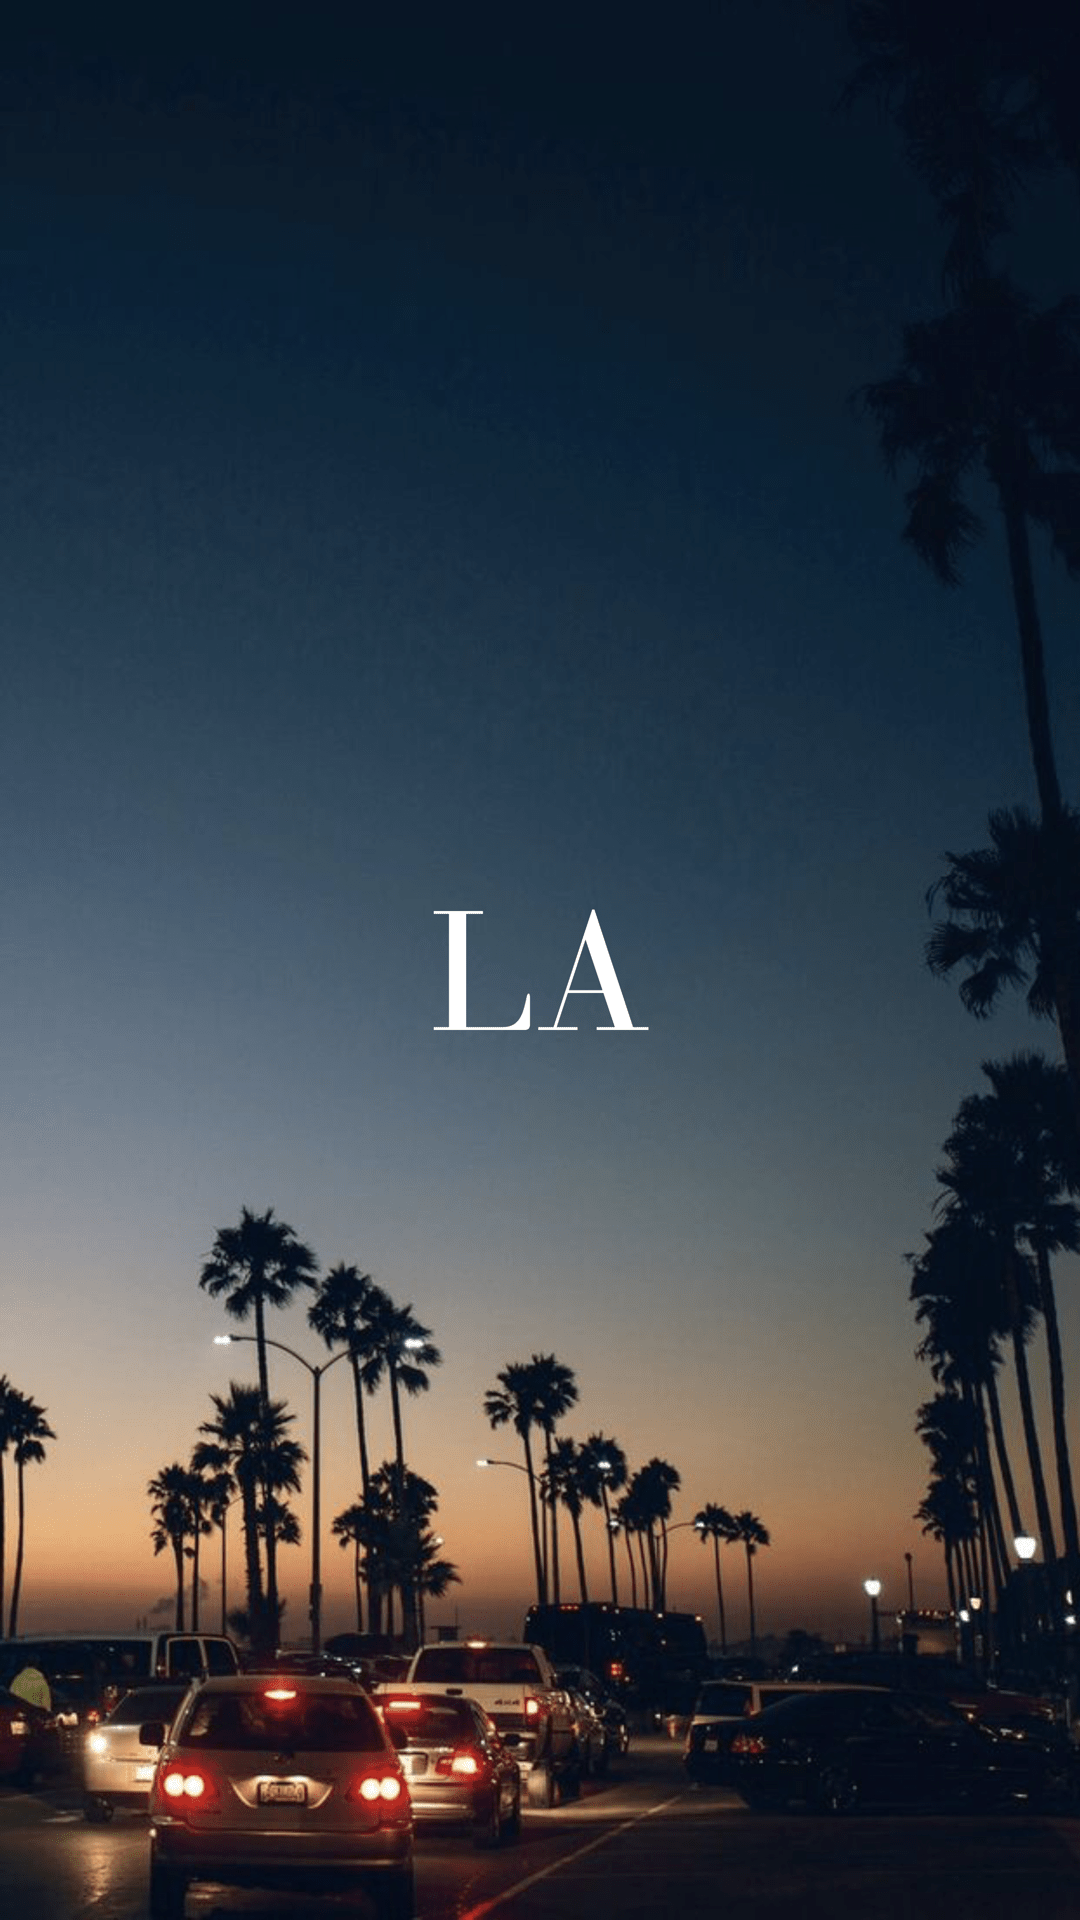 LA at night with palm trees and cars on the road - Los Angeles, California